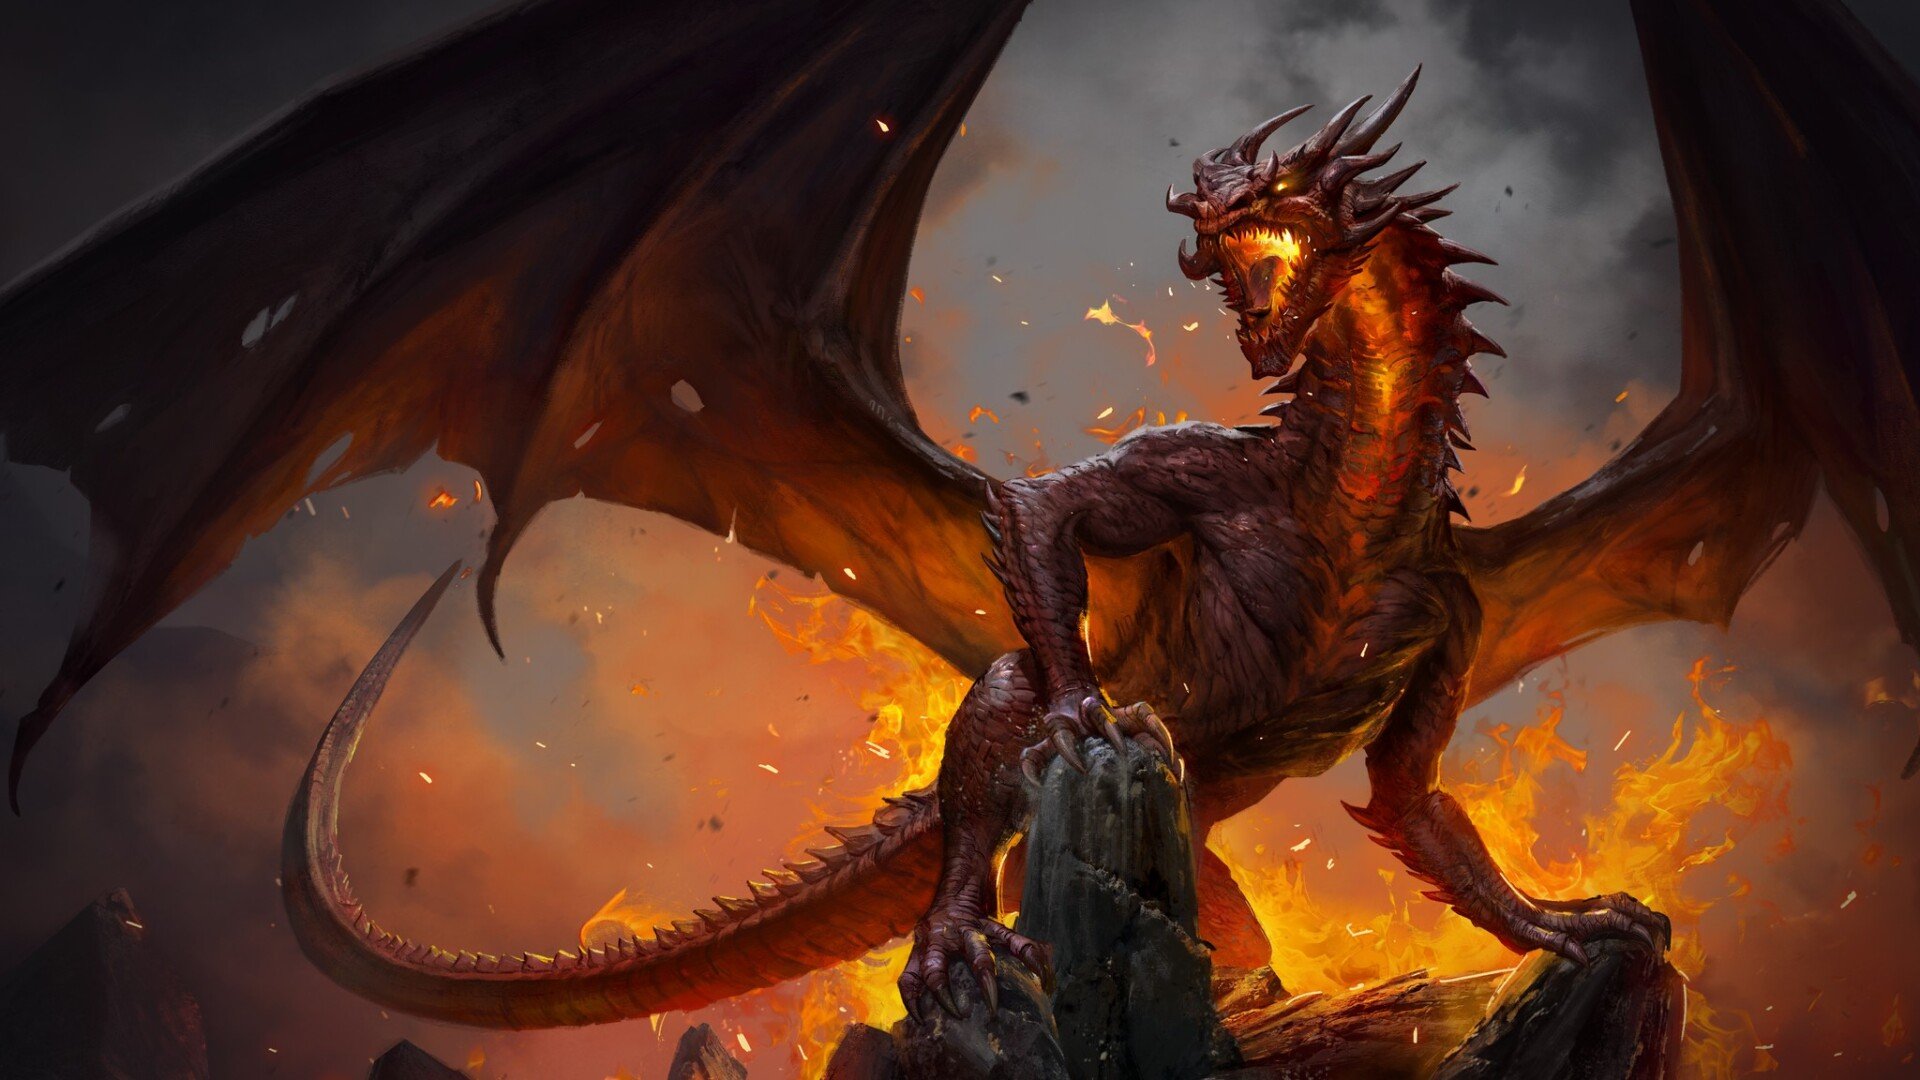 King's Bounty II: How to recruit the Red Dragon, Bone Dragon, and Chimera